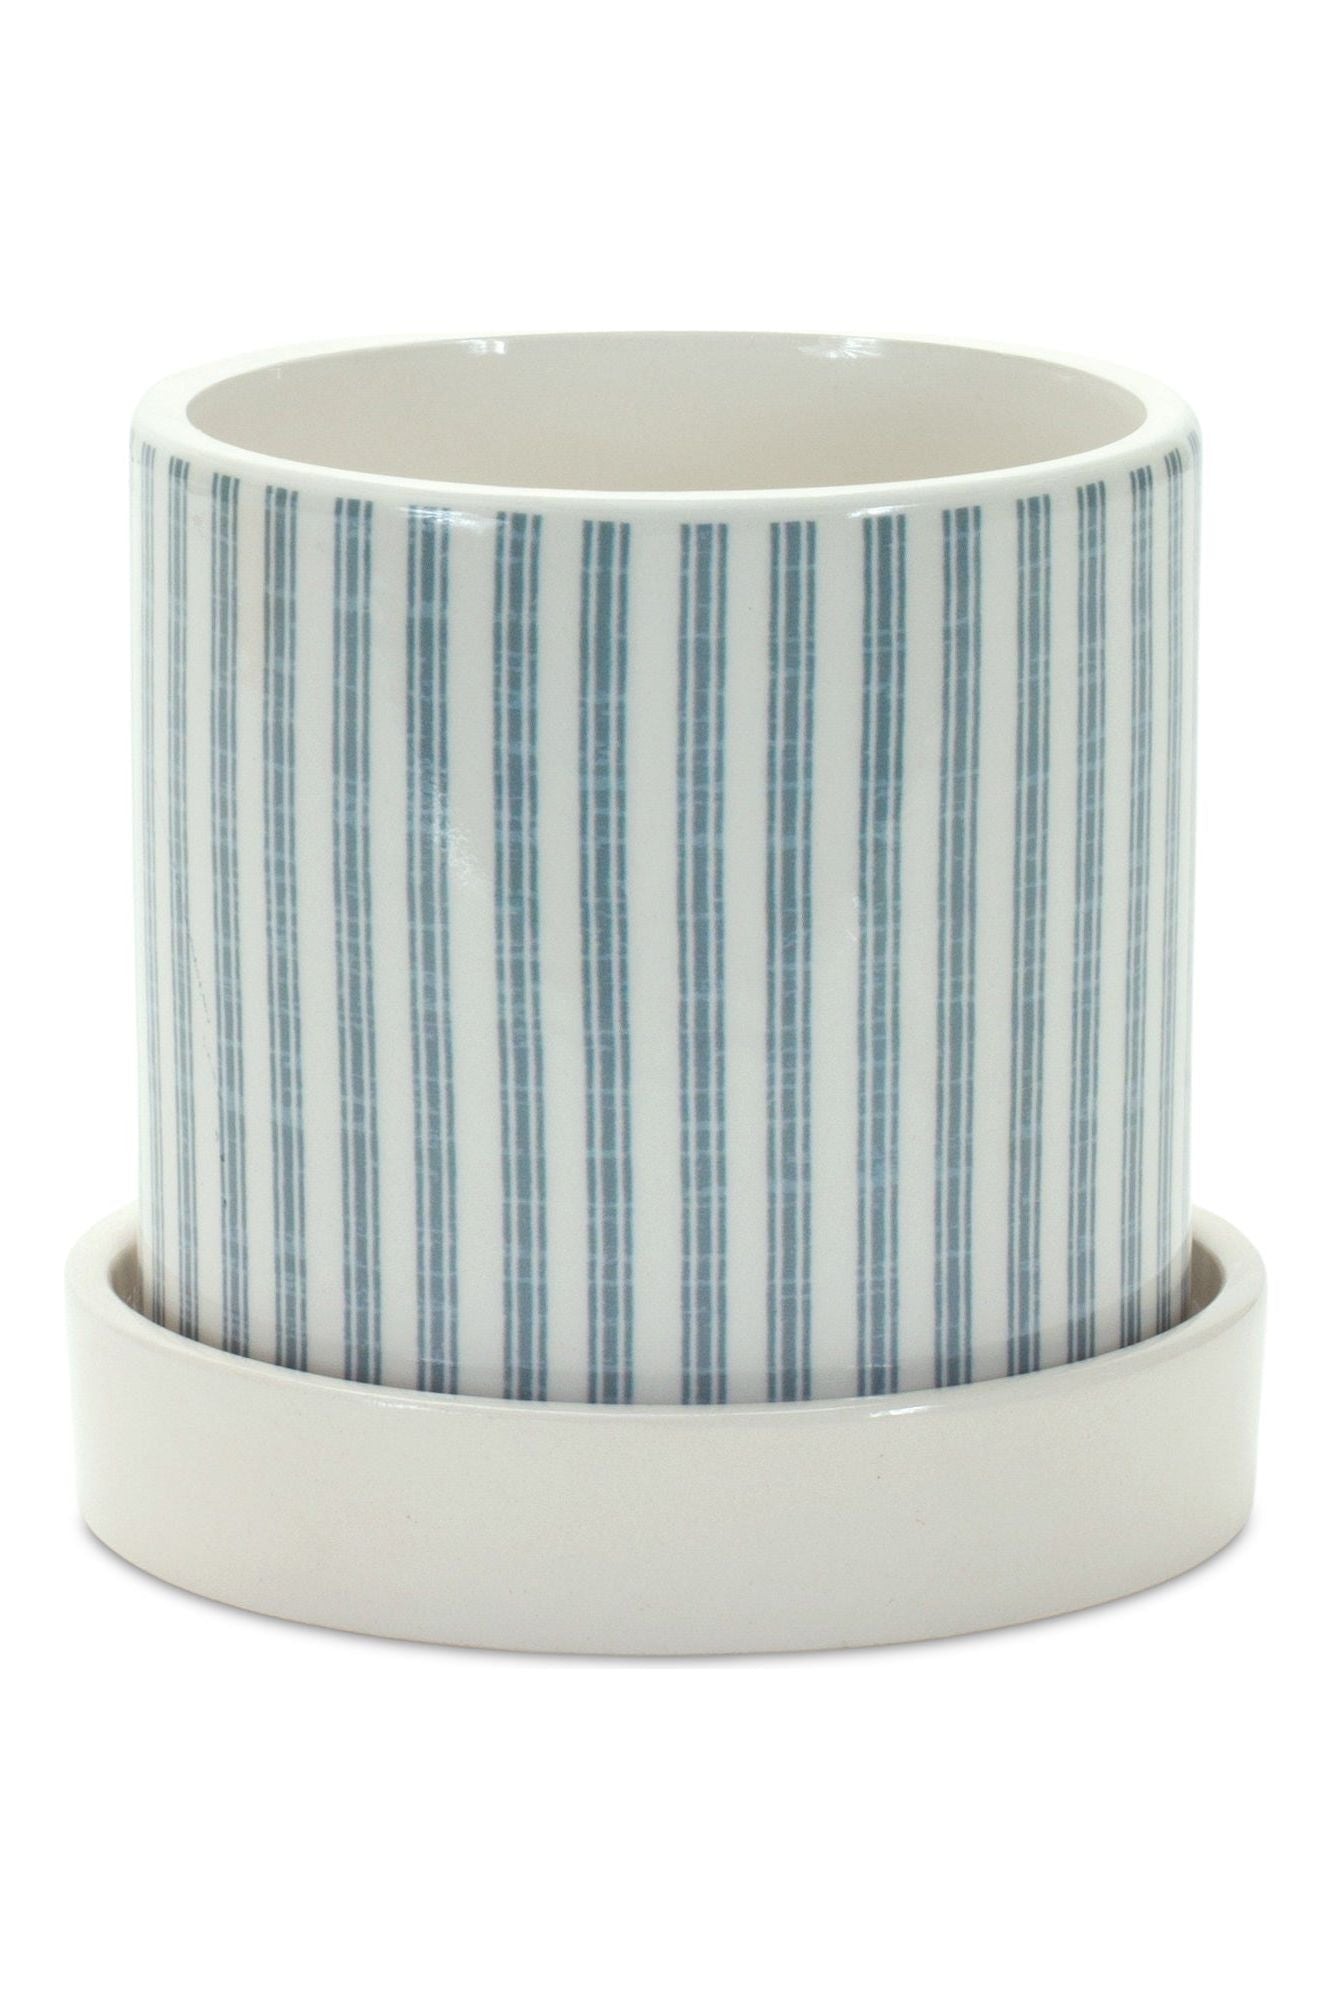 Shop For Blue and White Chicken and Striped Planter (Set of 2) 85141